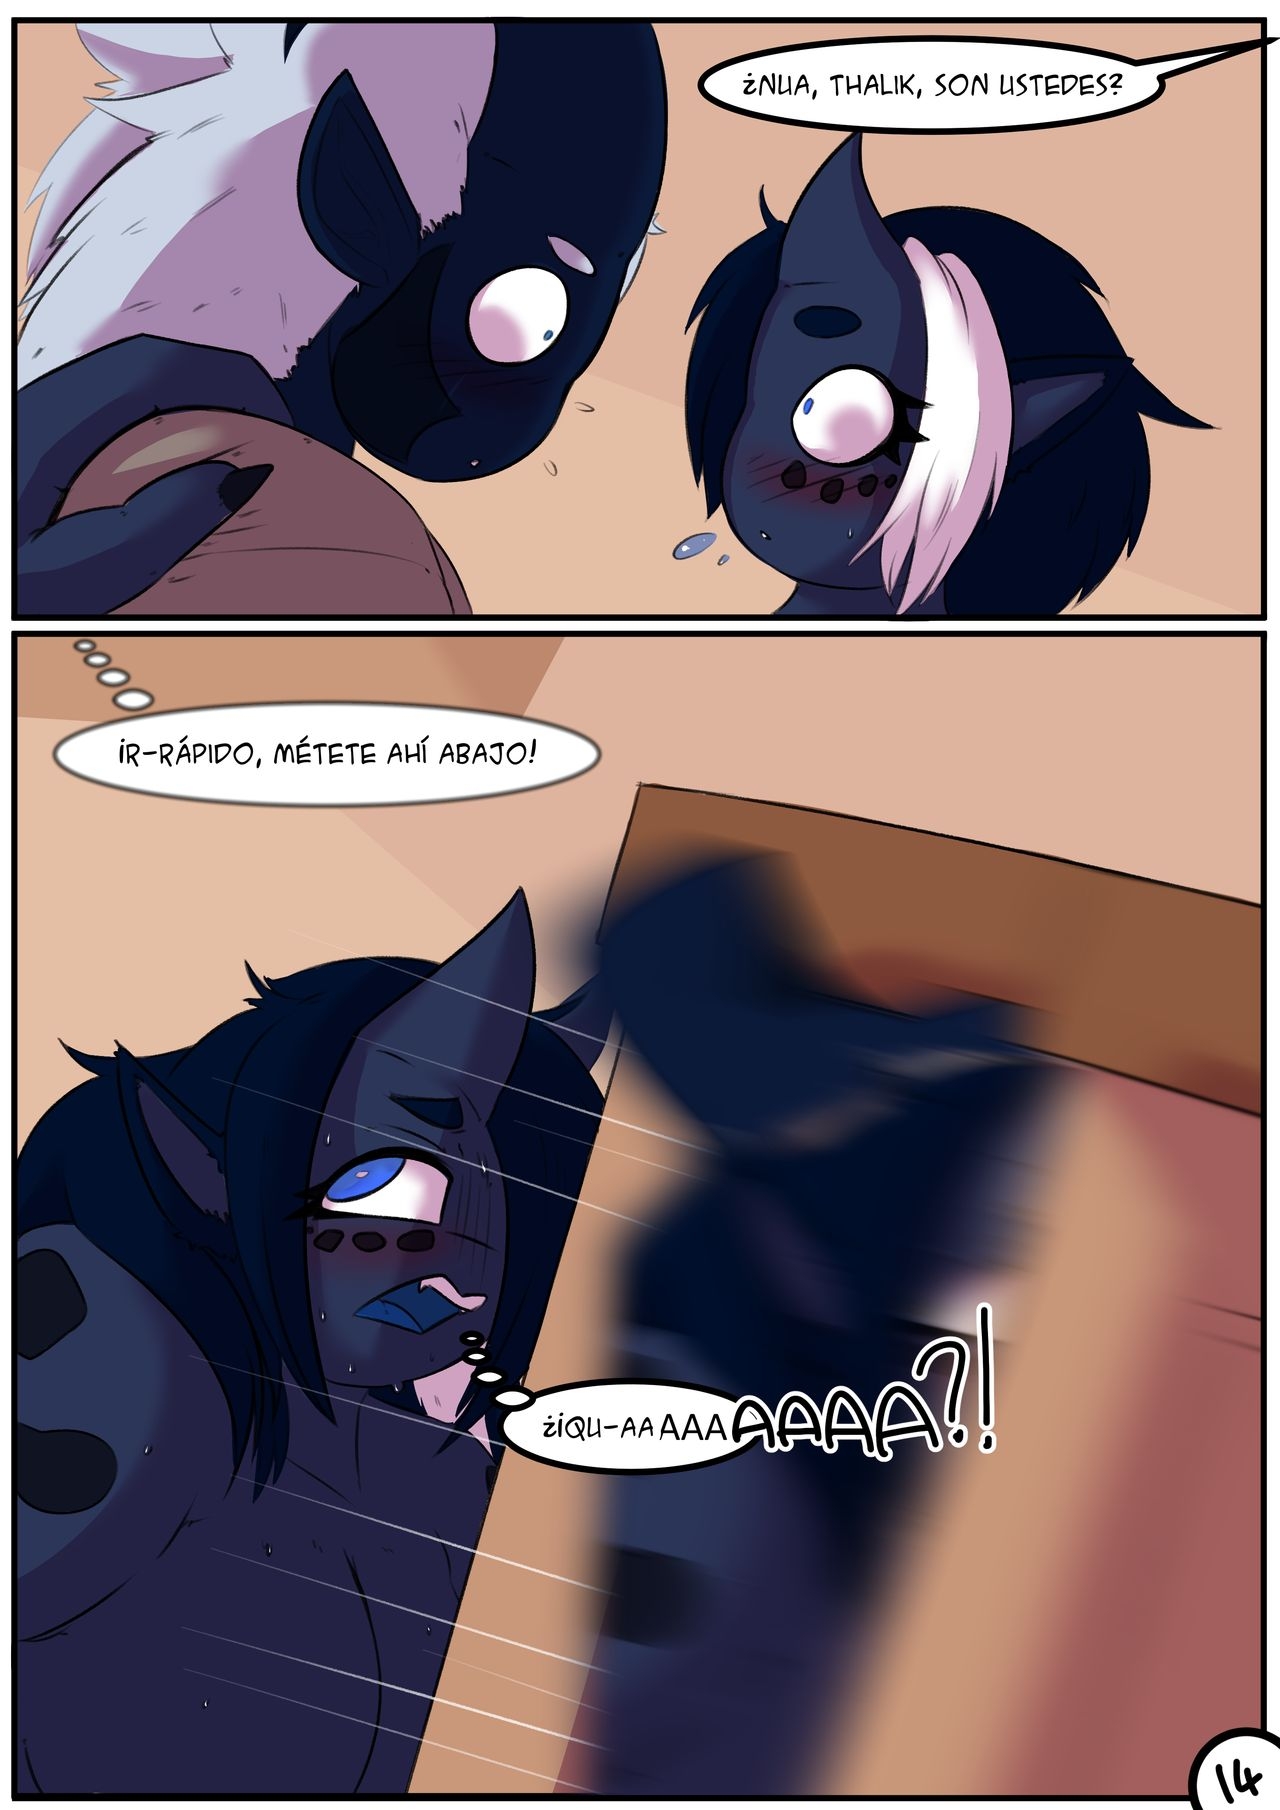 [Kitteh] Daddy's Girl - [Spanish] - Complete 14